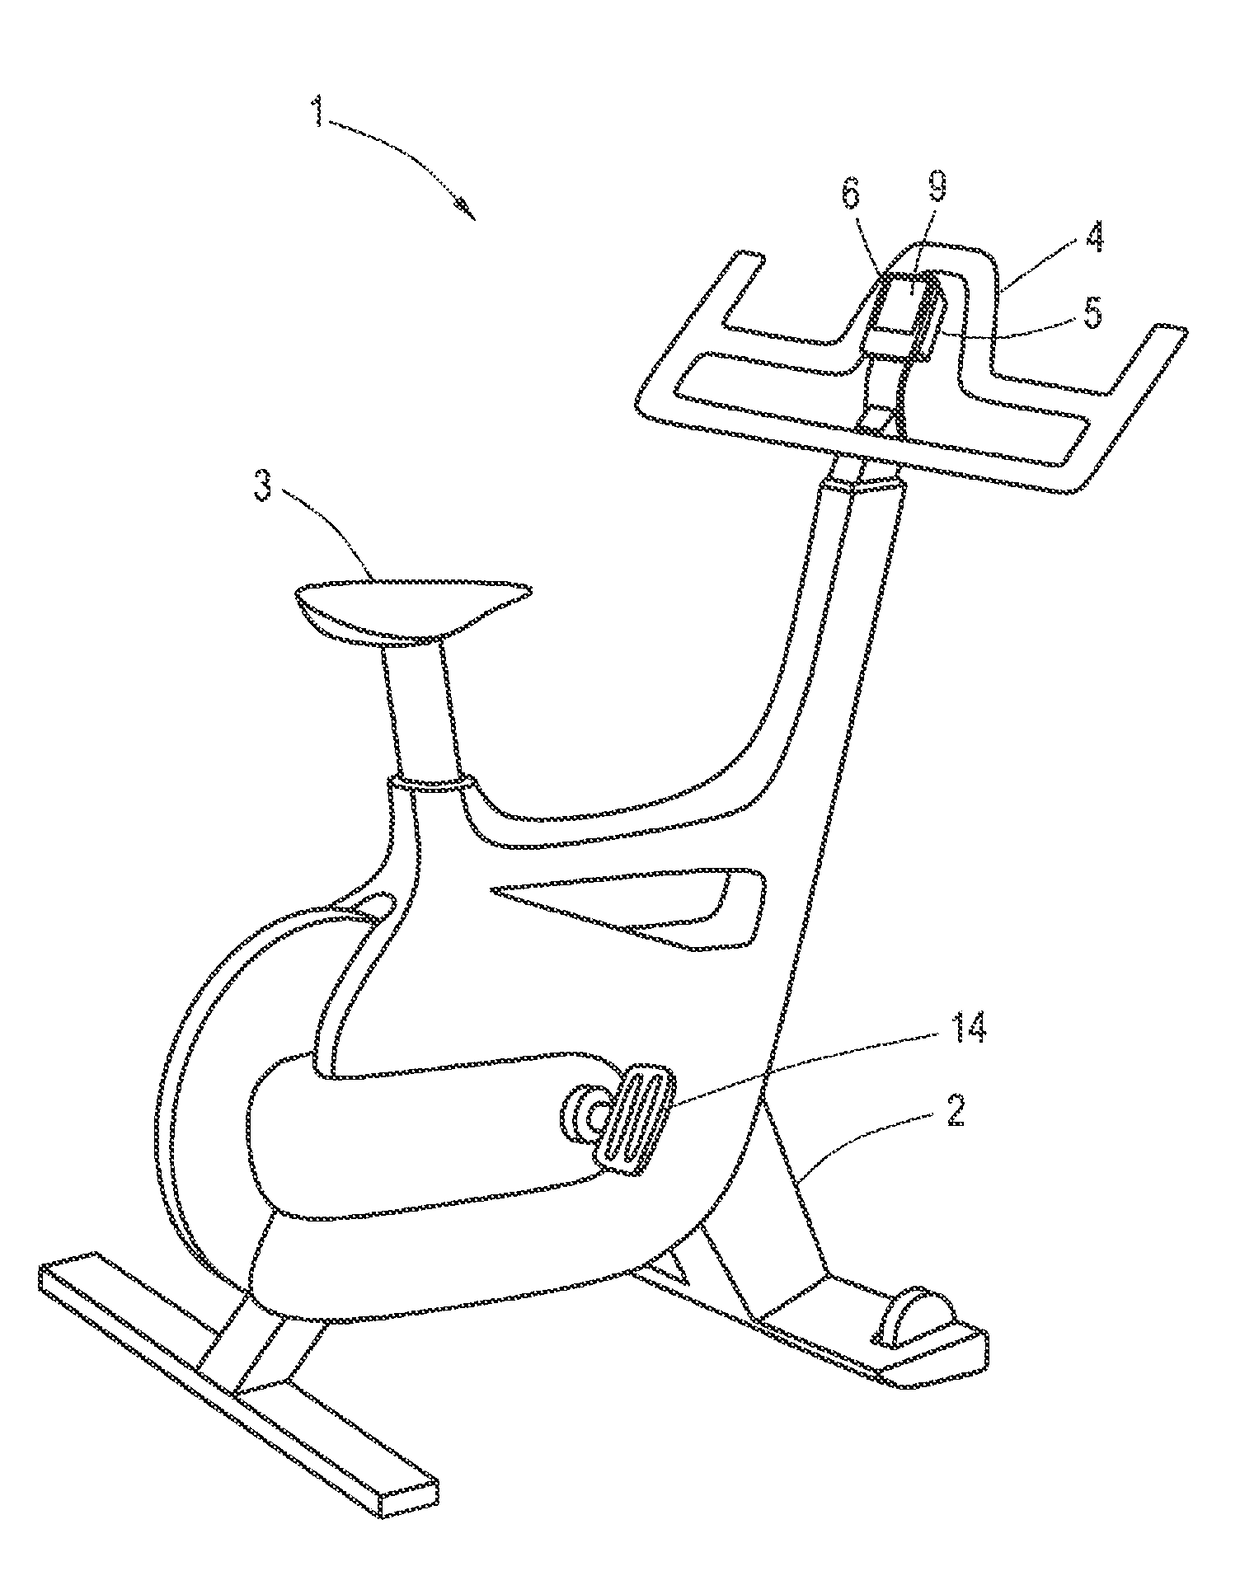 Stationary exercise equipment for physical training, more particular an exercise bike